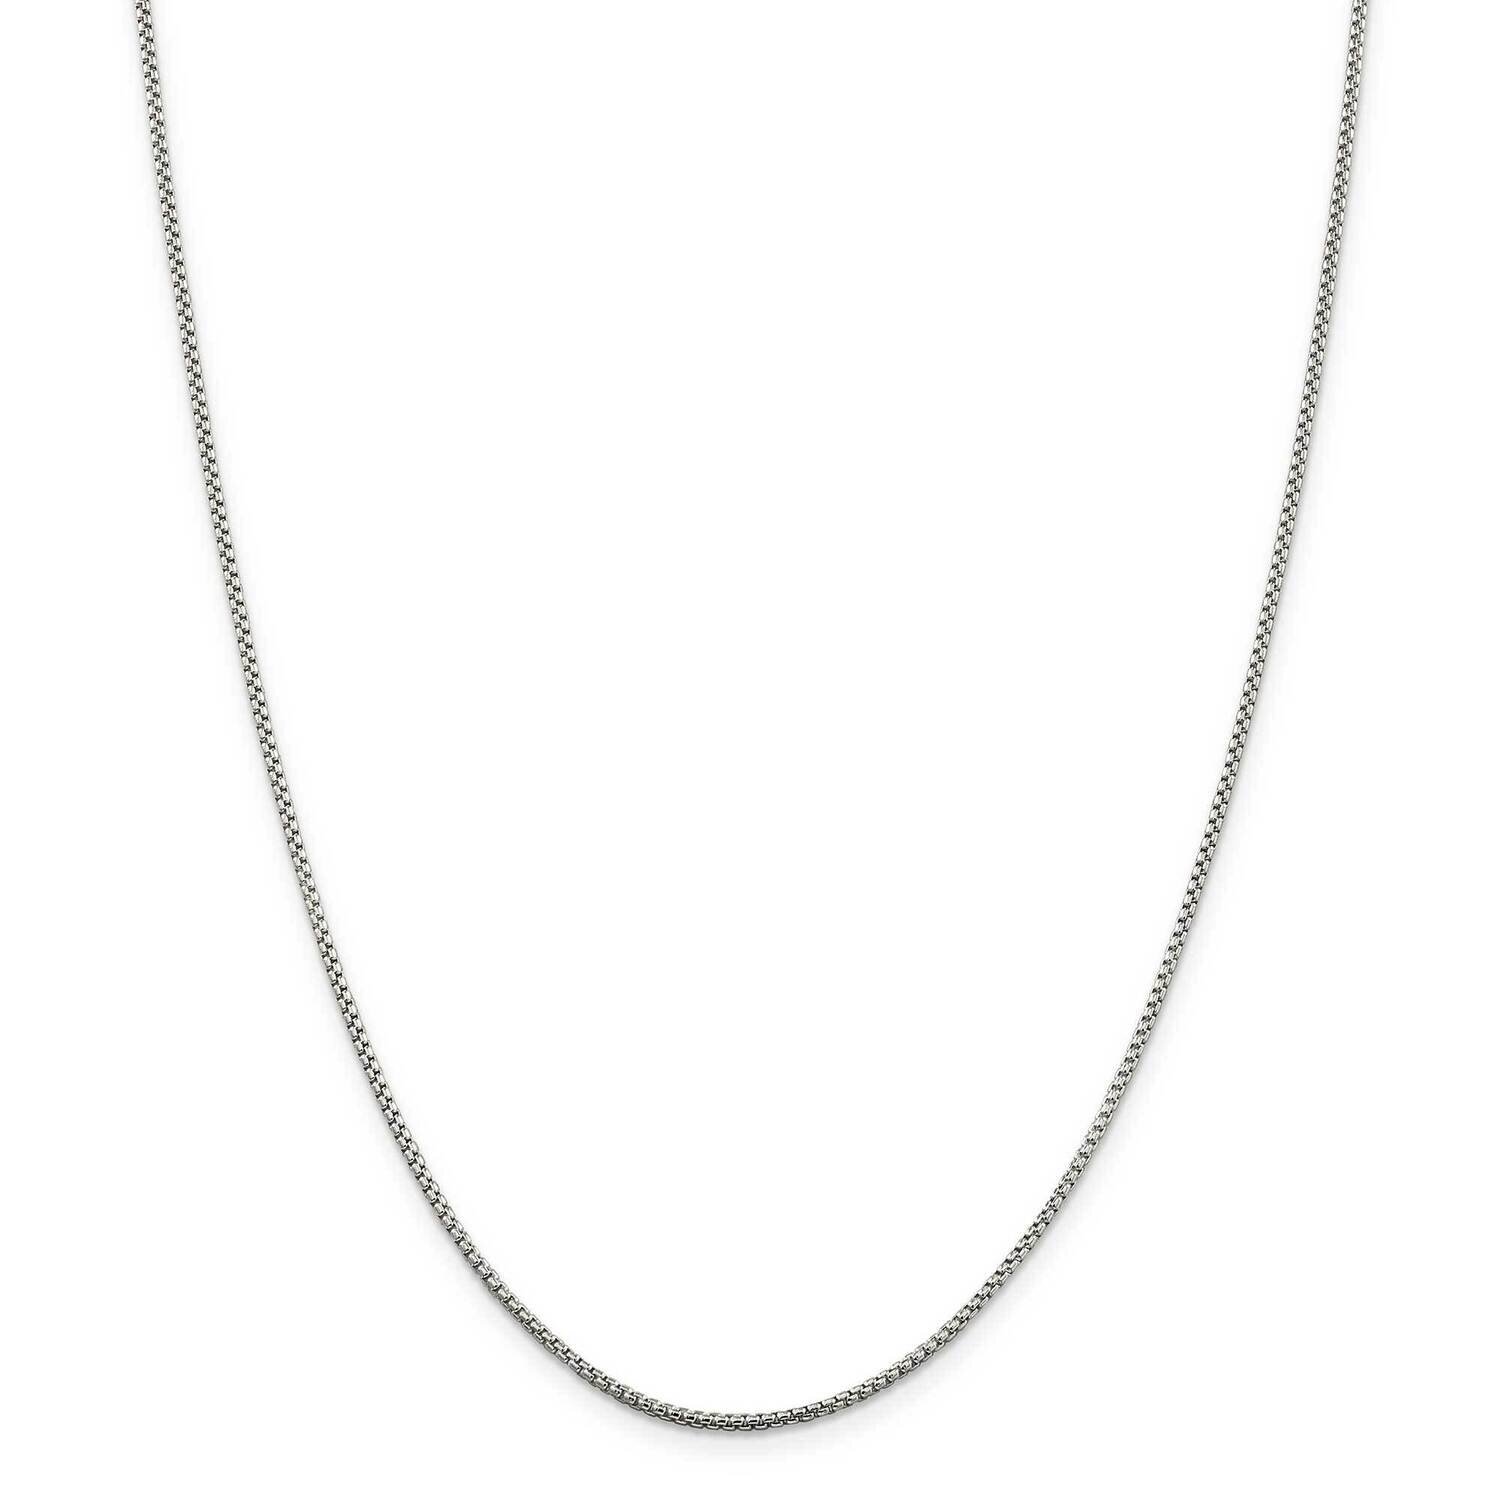 1.5mm Round Box Chain 42 Inch Sterling Silver QHX028-42